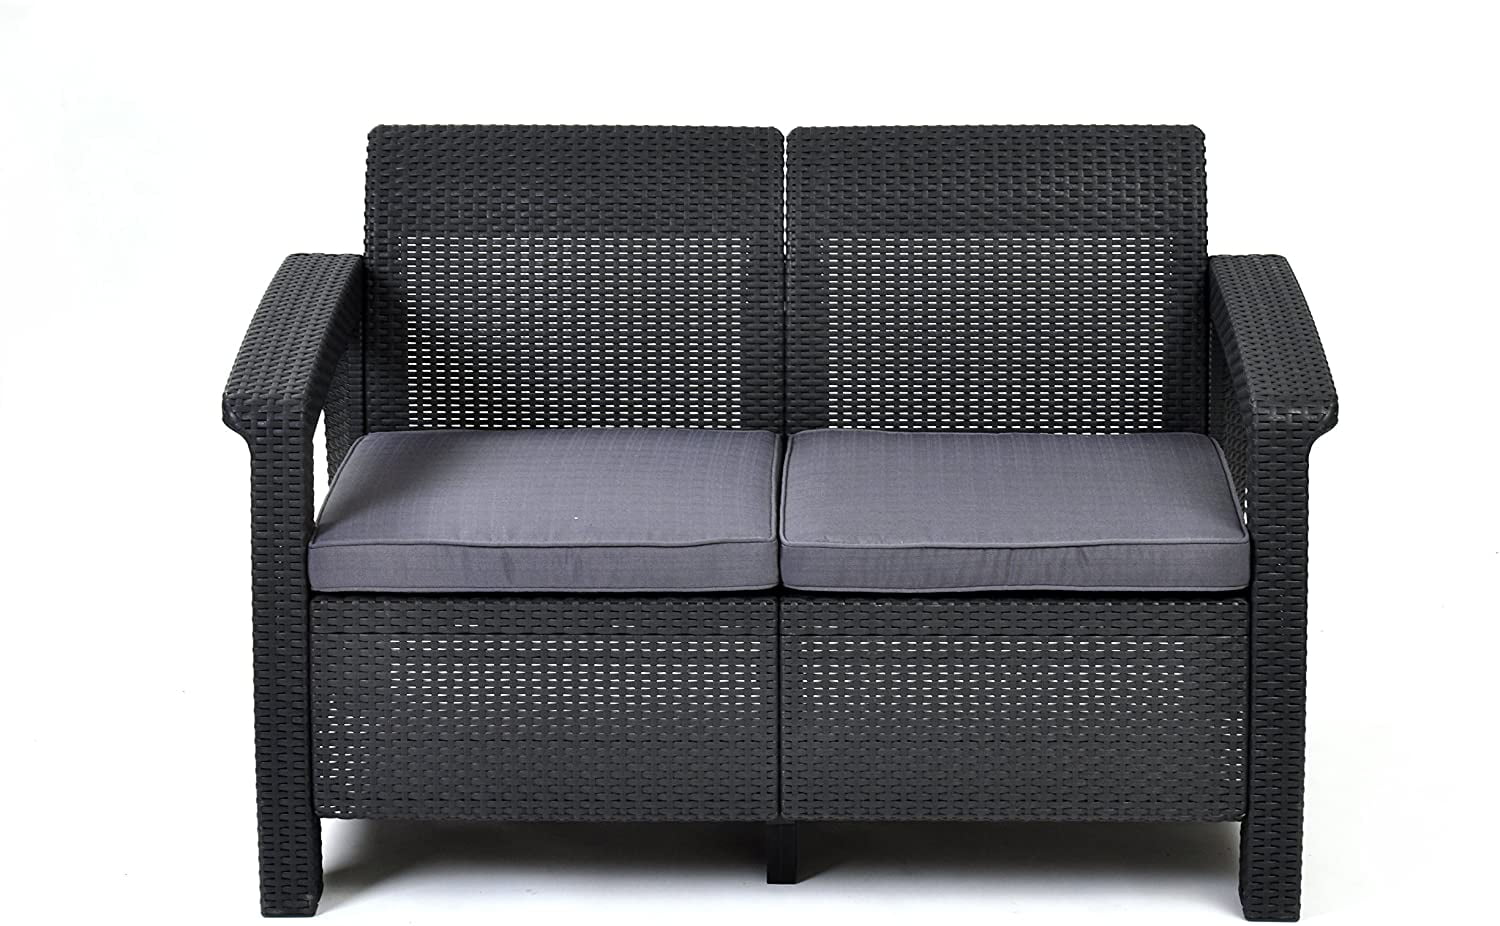 Keter With Cushions Resin Wicker, Resin Wicker Patio Furniture No Cushions